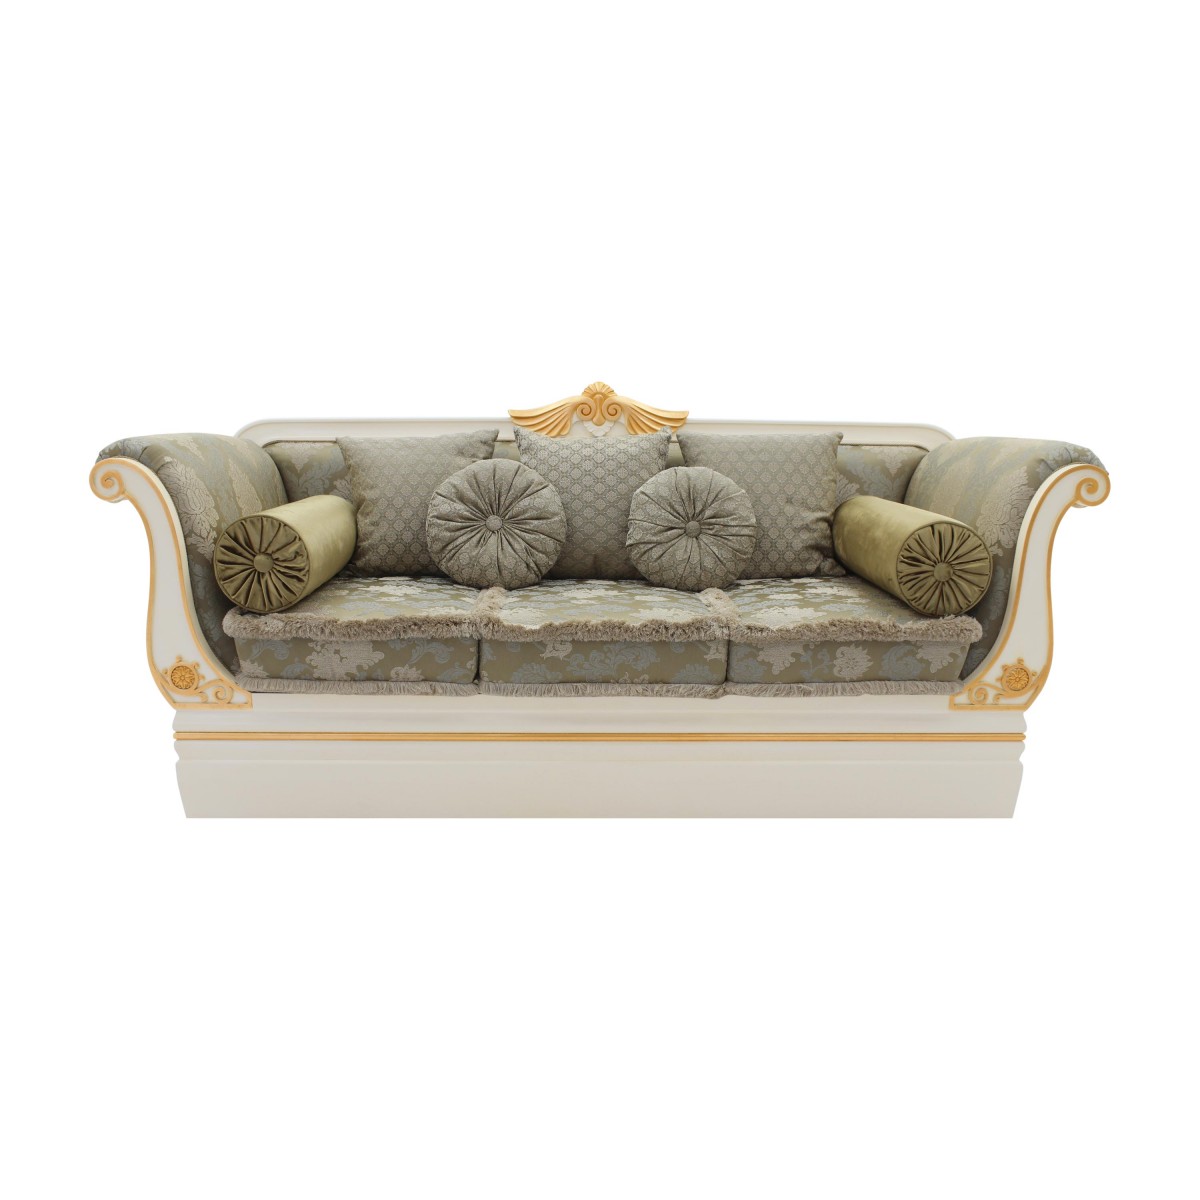 classic style wooden sofa